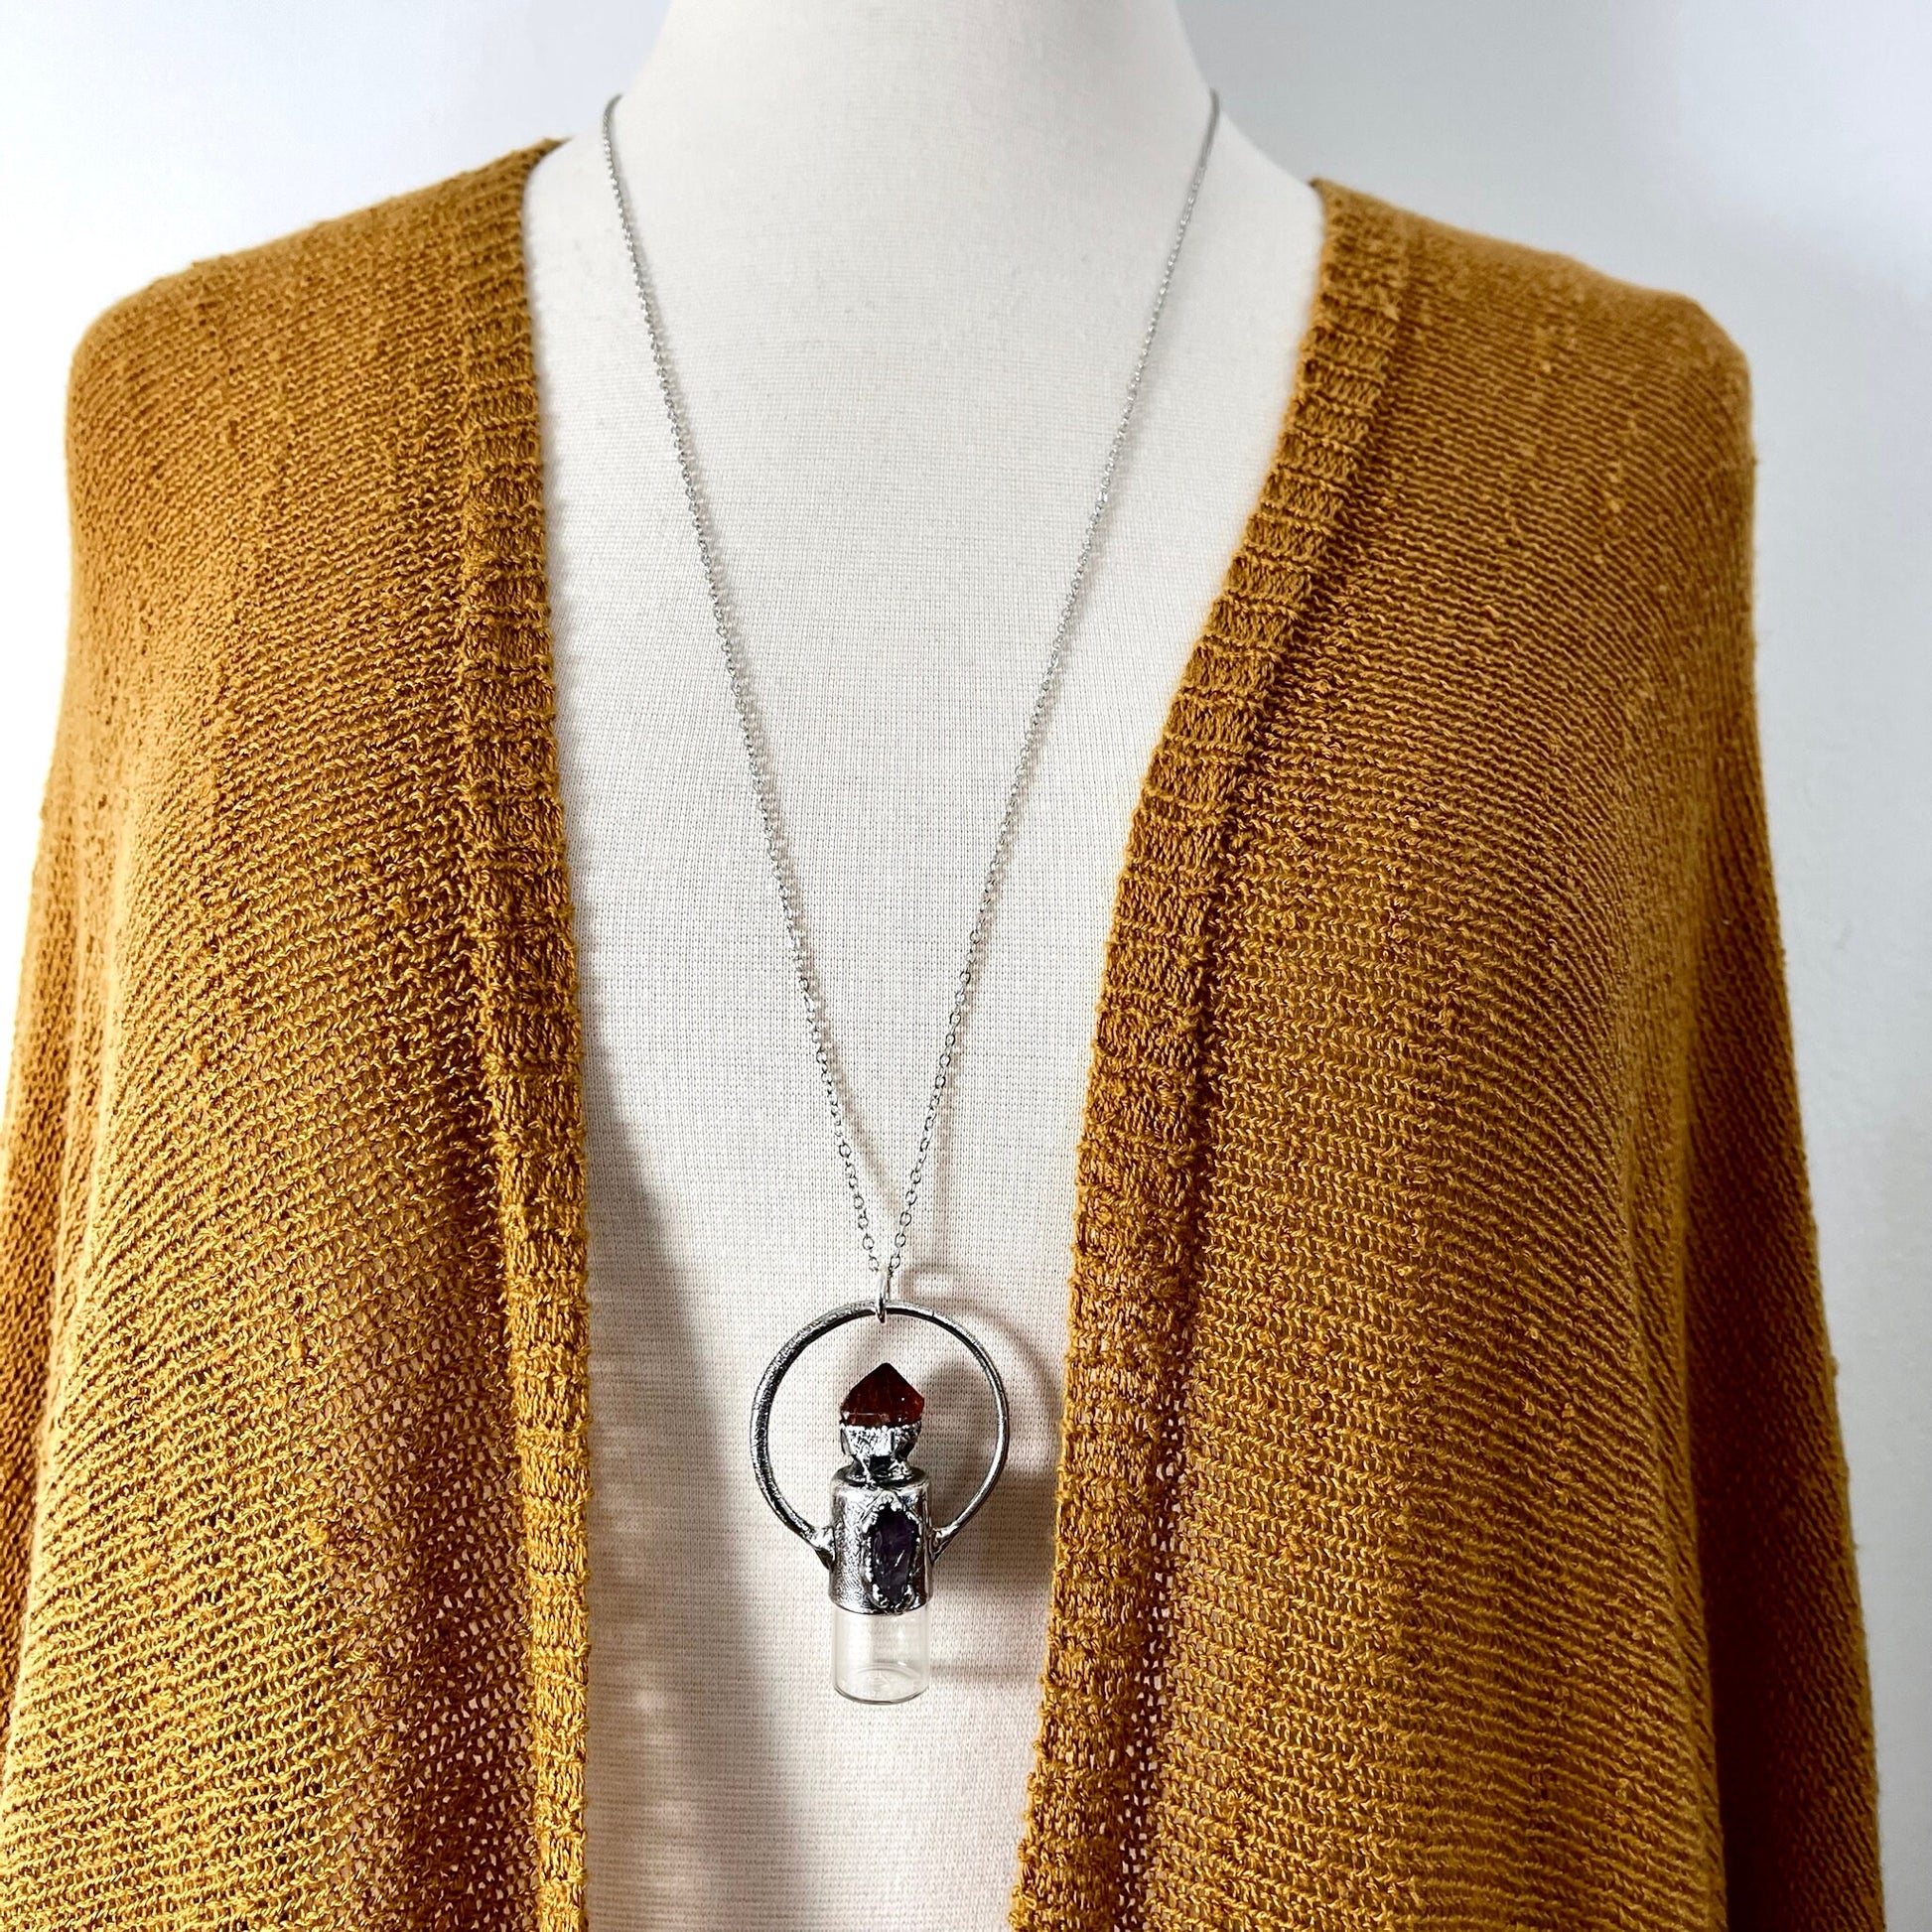 Raw Citrine and Amethyst Crystal Necklace / Silver Crystal Rollerball Necklace / Foxlark Collection - One of a Kind / Gothic Jewelry